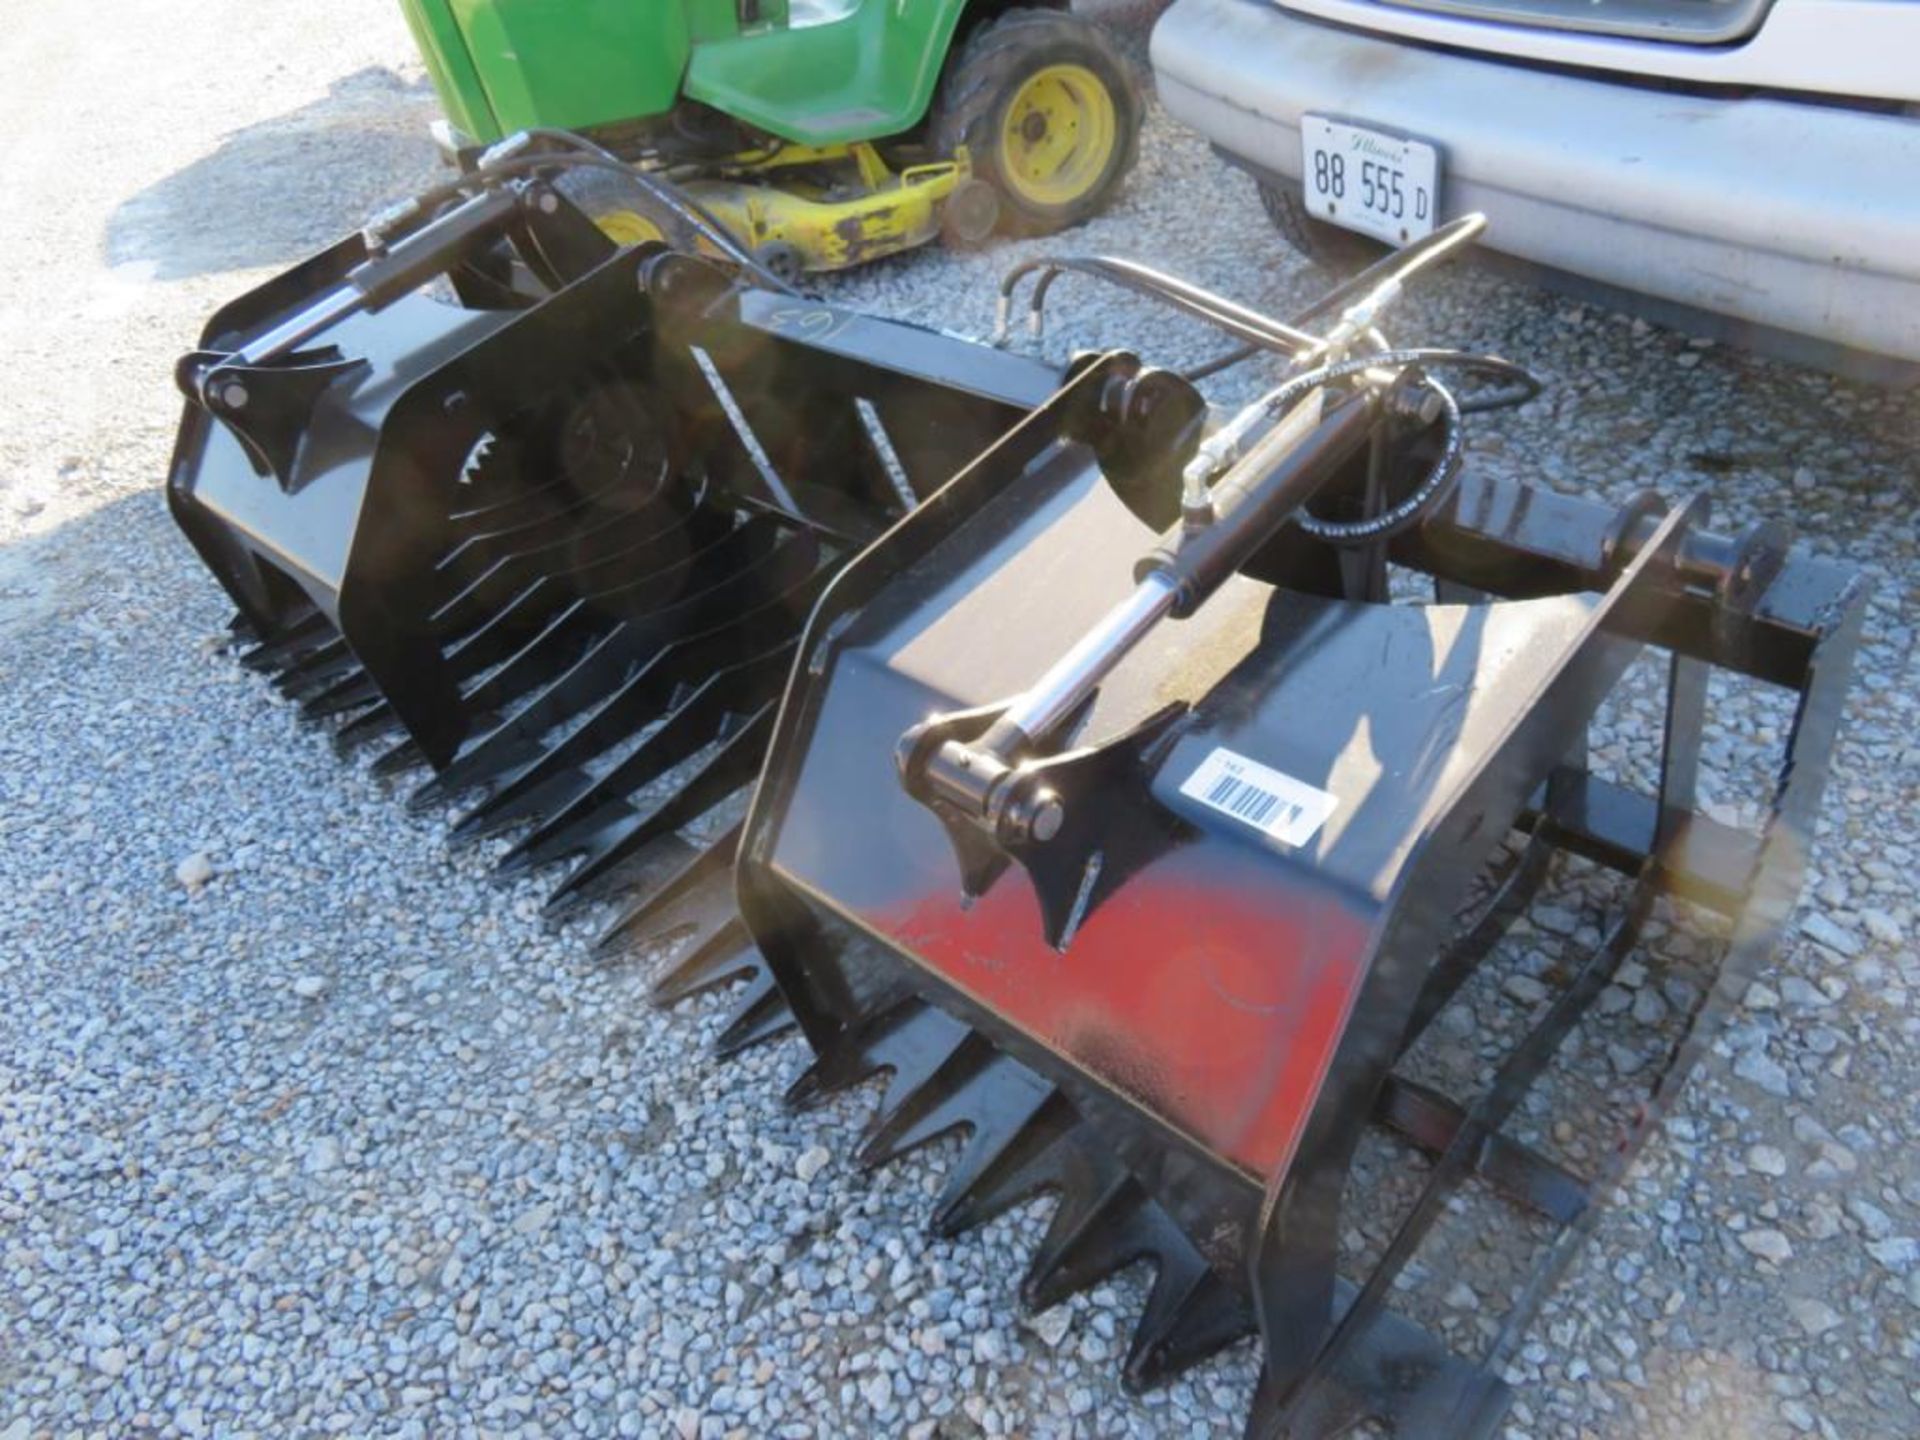 84 Skeleton Grapple with 4" Tine Spacing Brute brand skid steer attachment